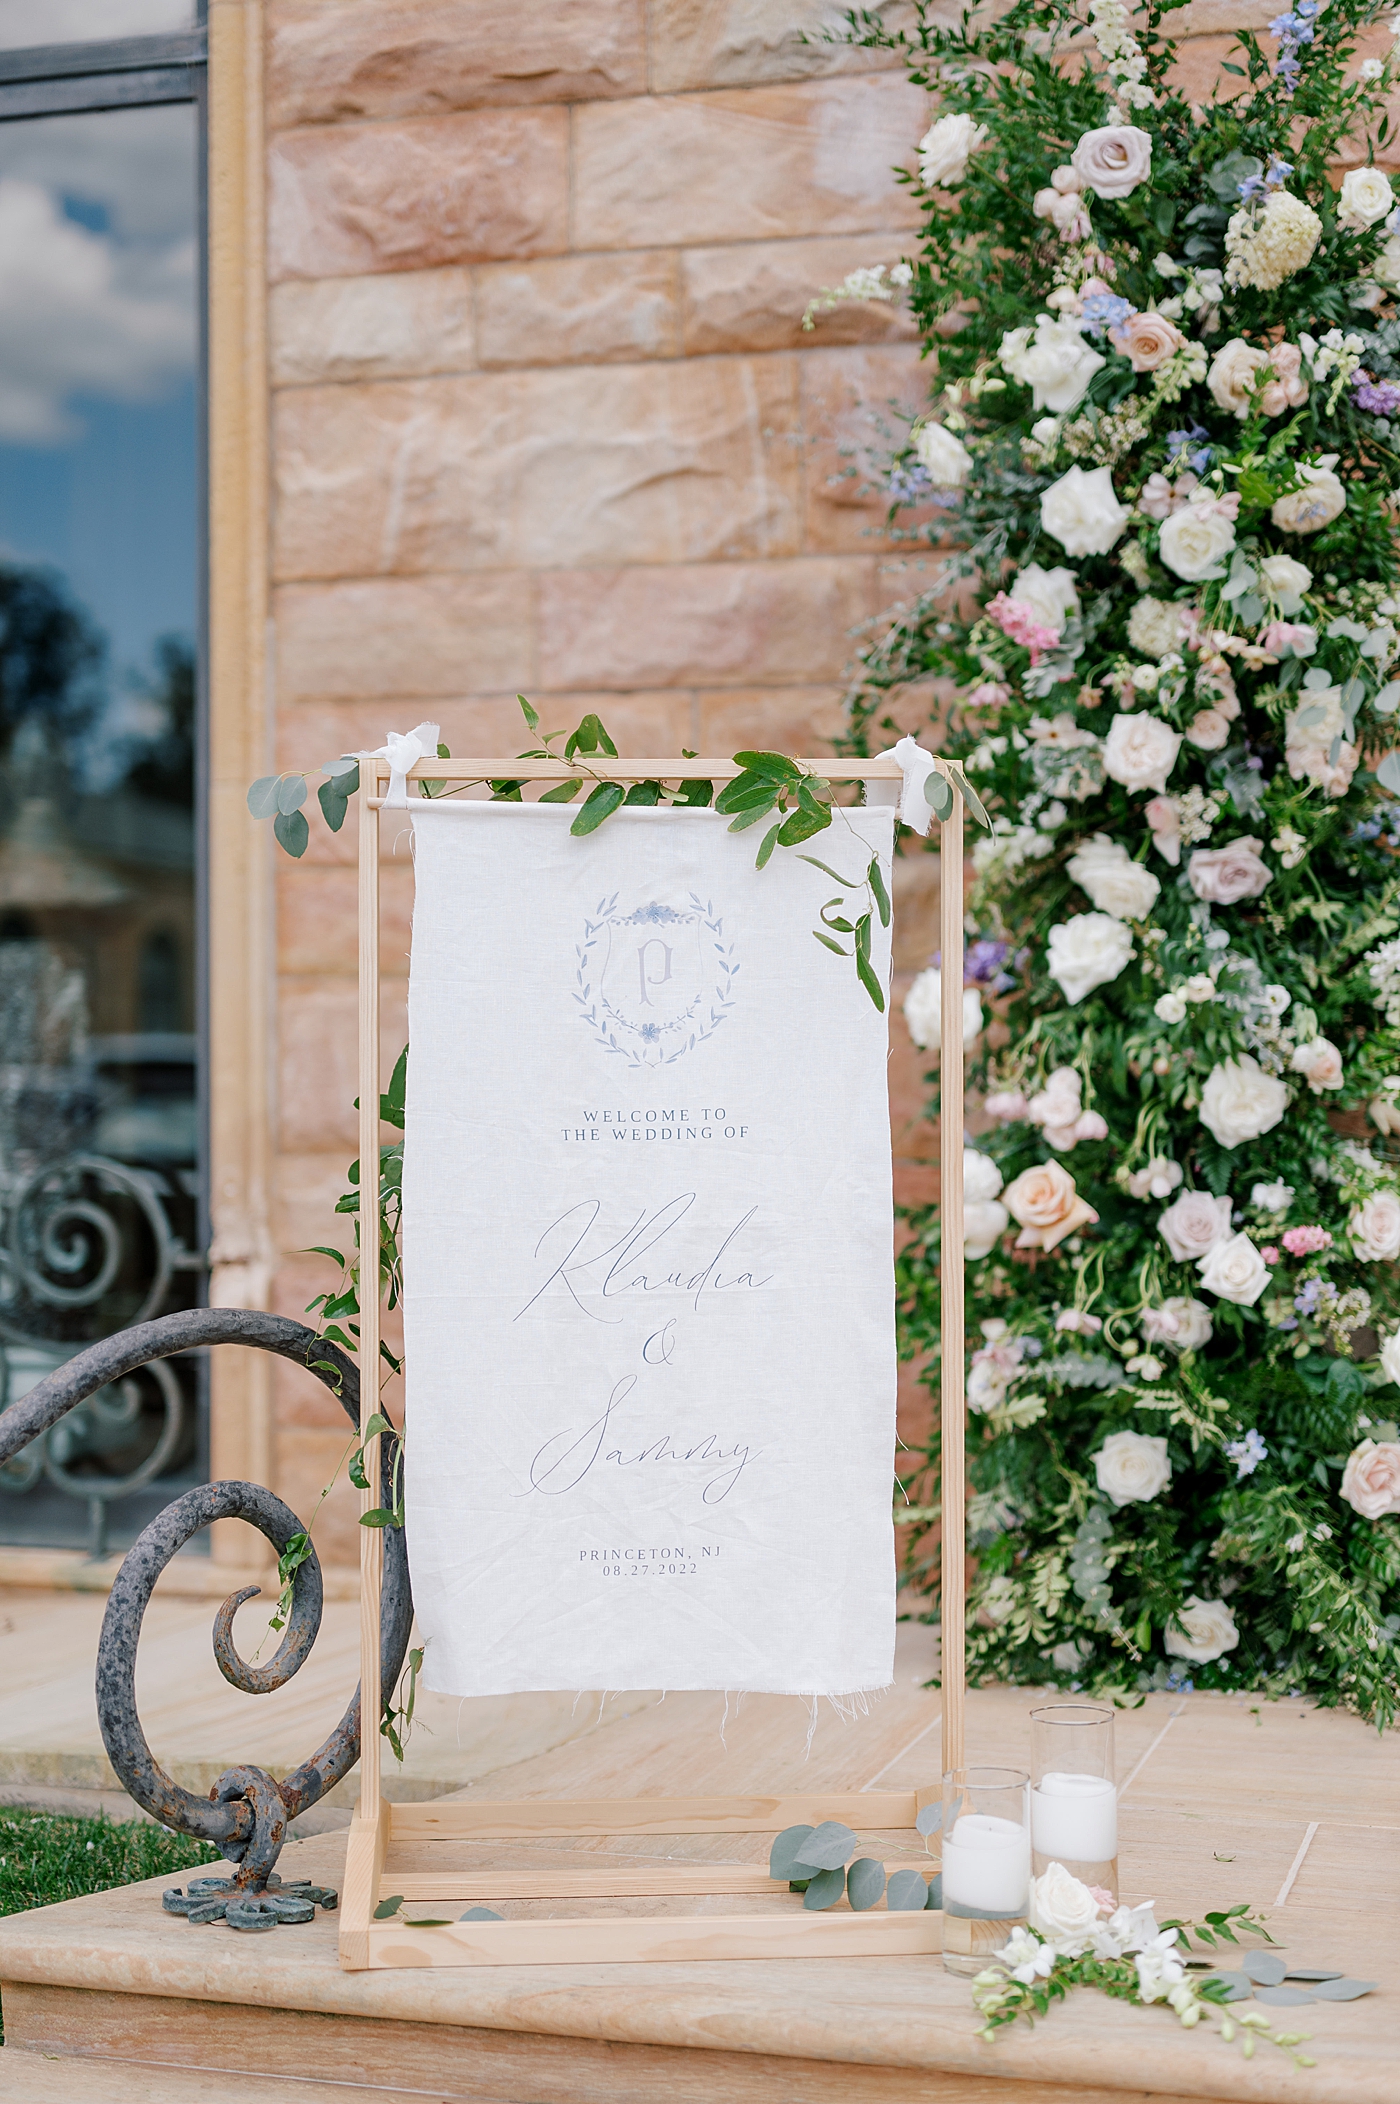 Cloth wedding sign with custom calligraphy | Image by Hope Helmuth Photography